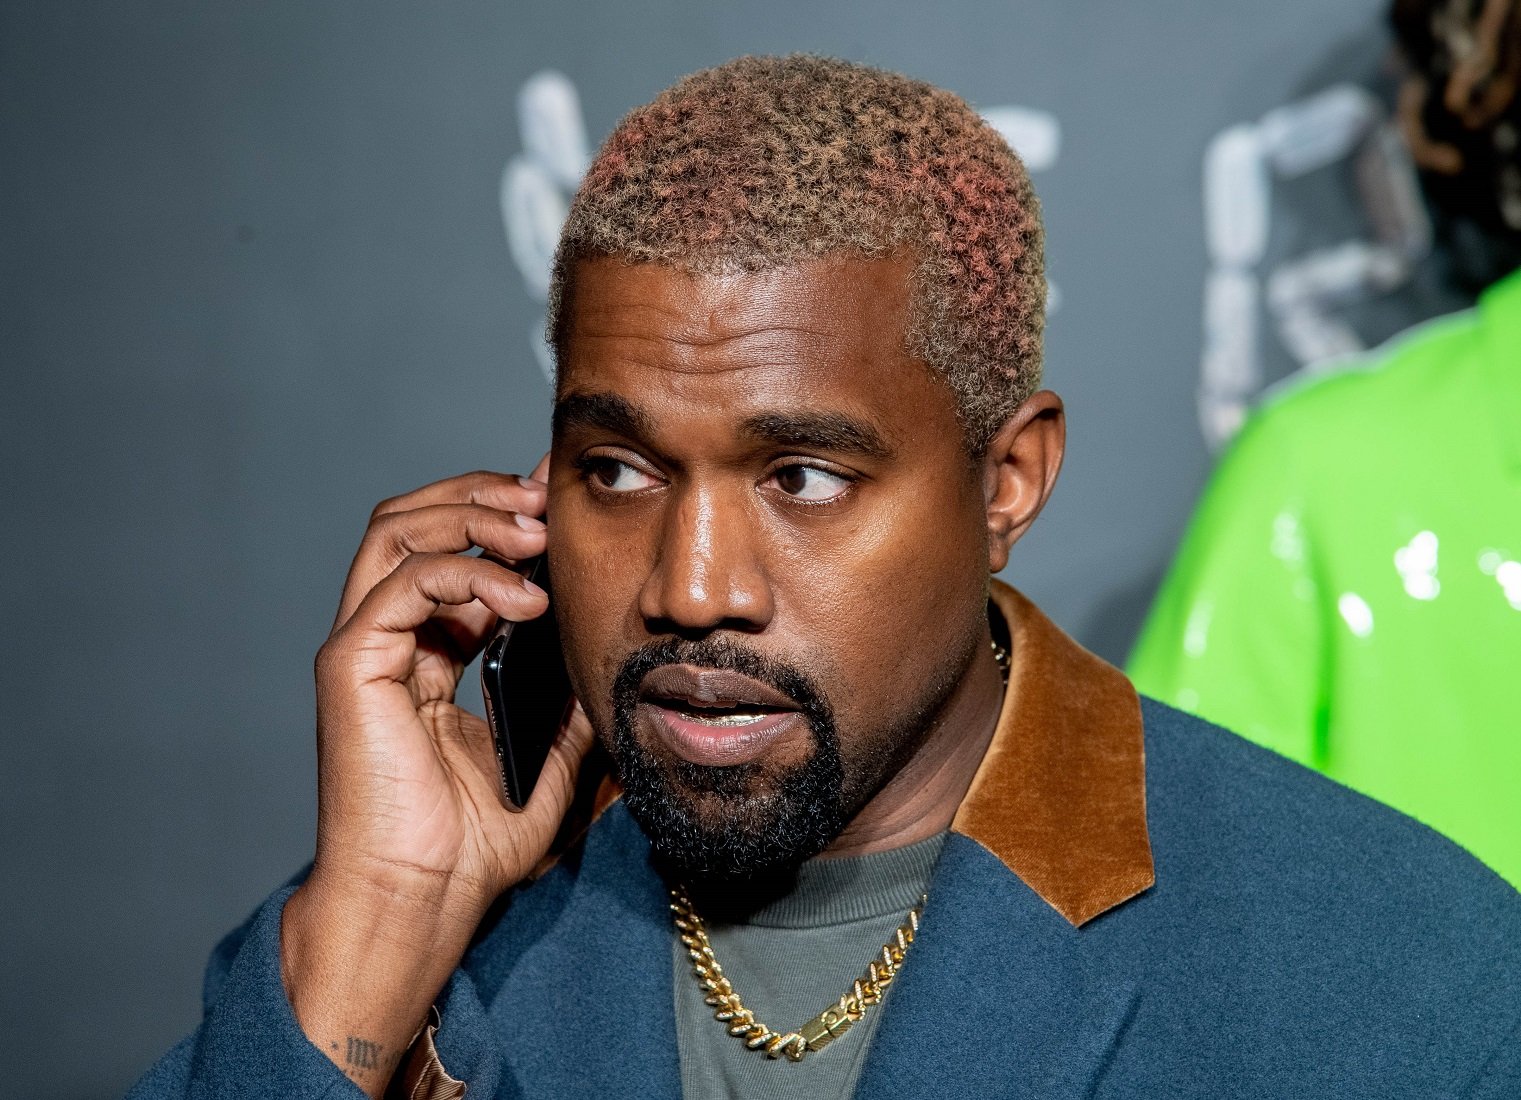 Kanye West’s net worth rises to $ 6.6 billion – he is now the richest black man in US history